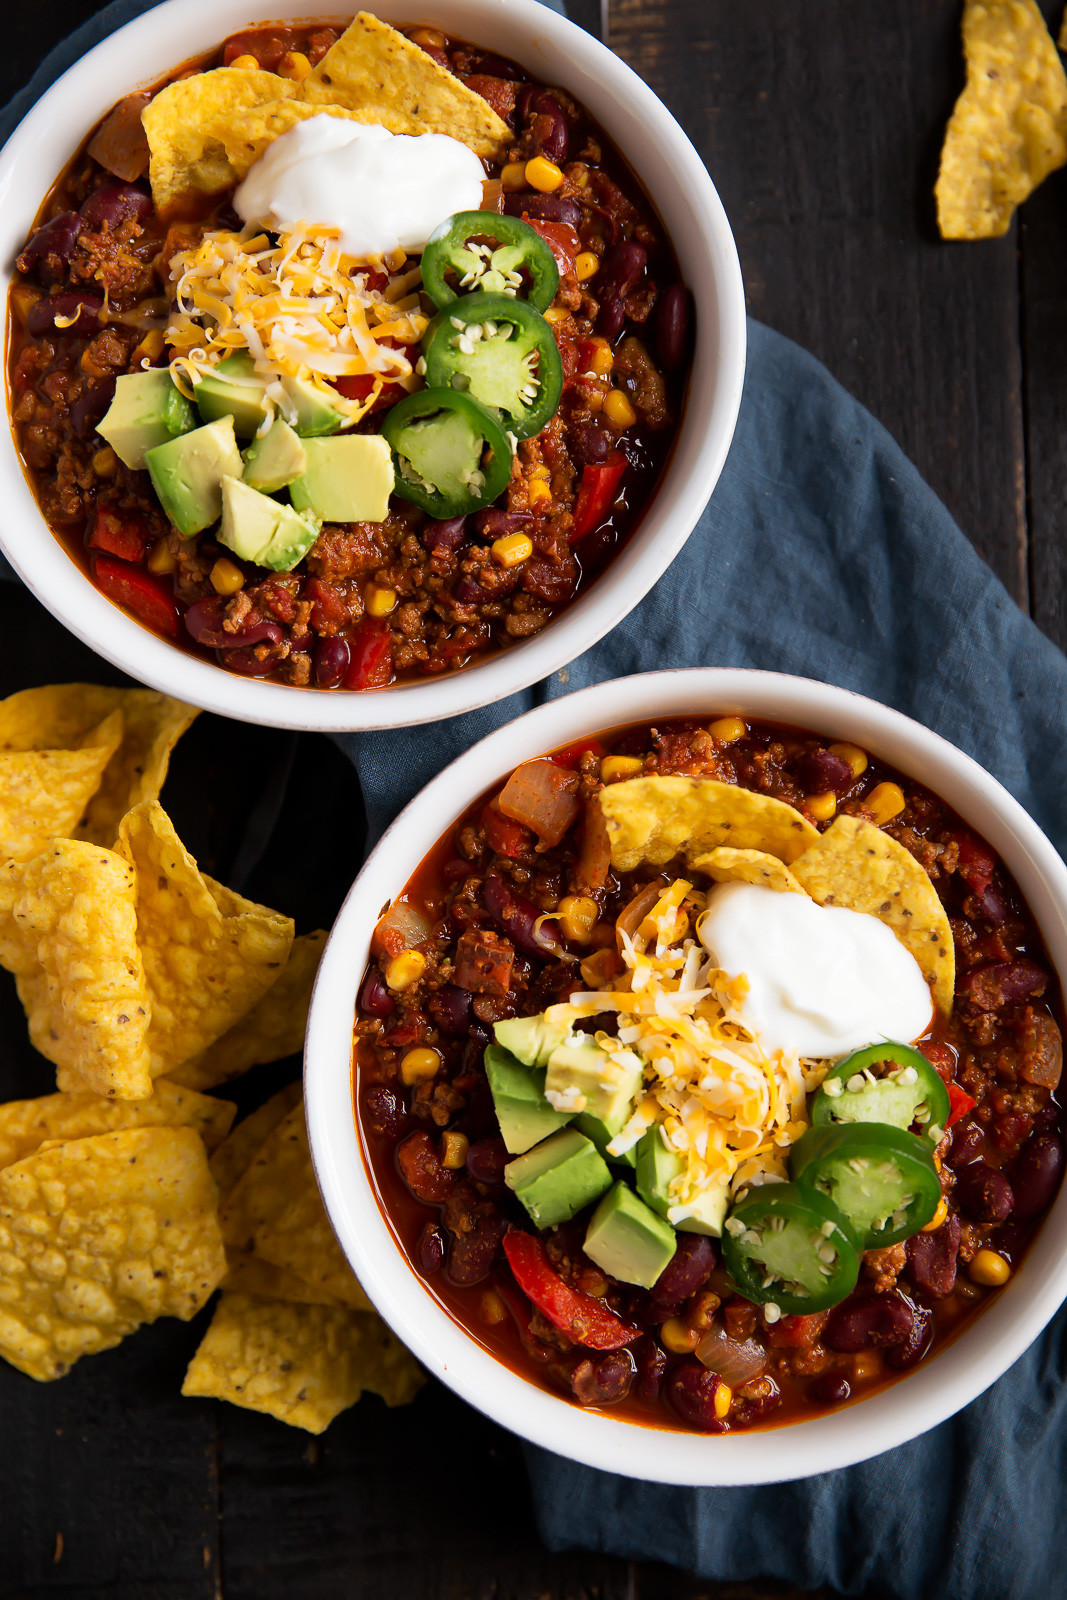 Healthy Recipes With Ground Turkey
 The Best Healthy Turkey Chili